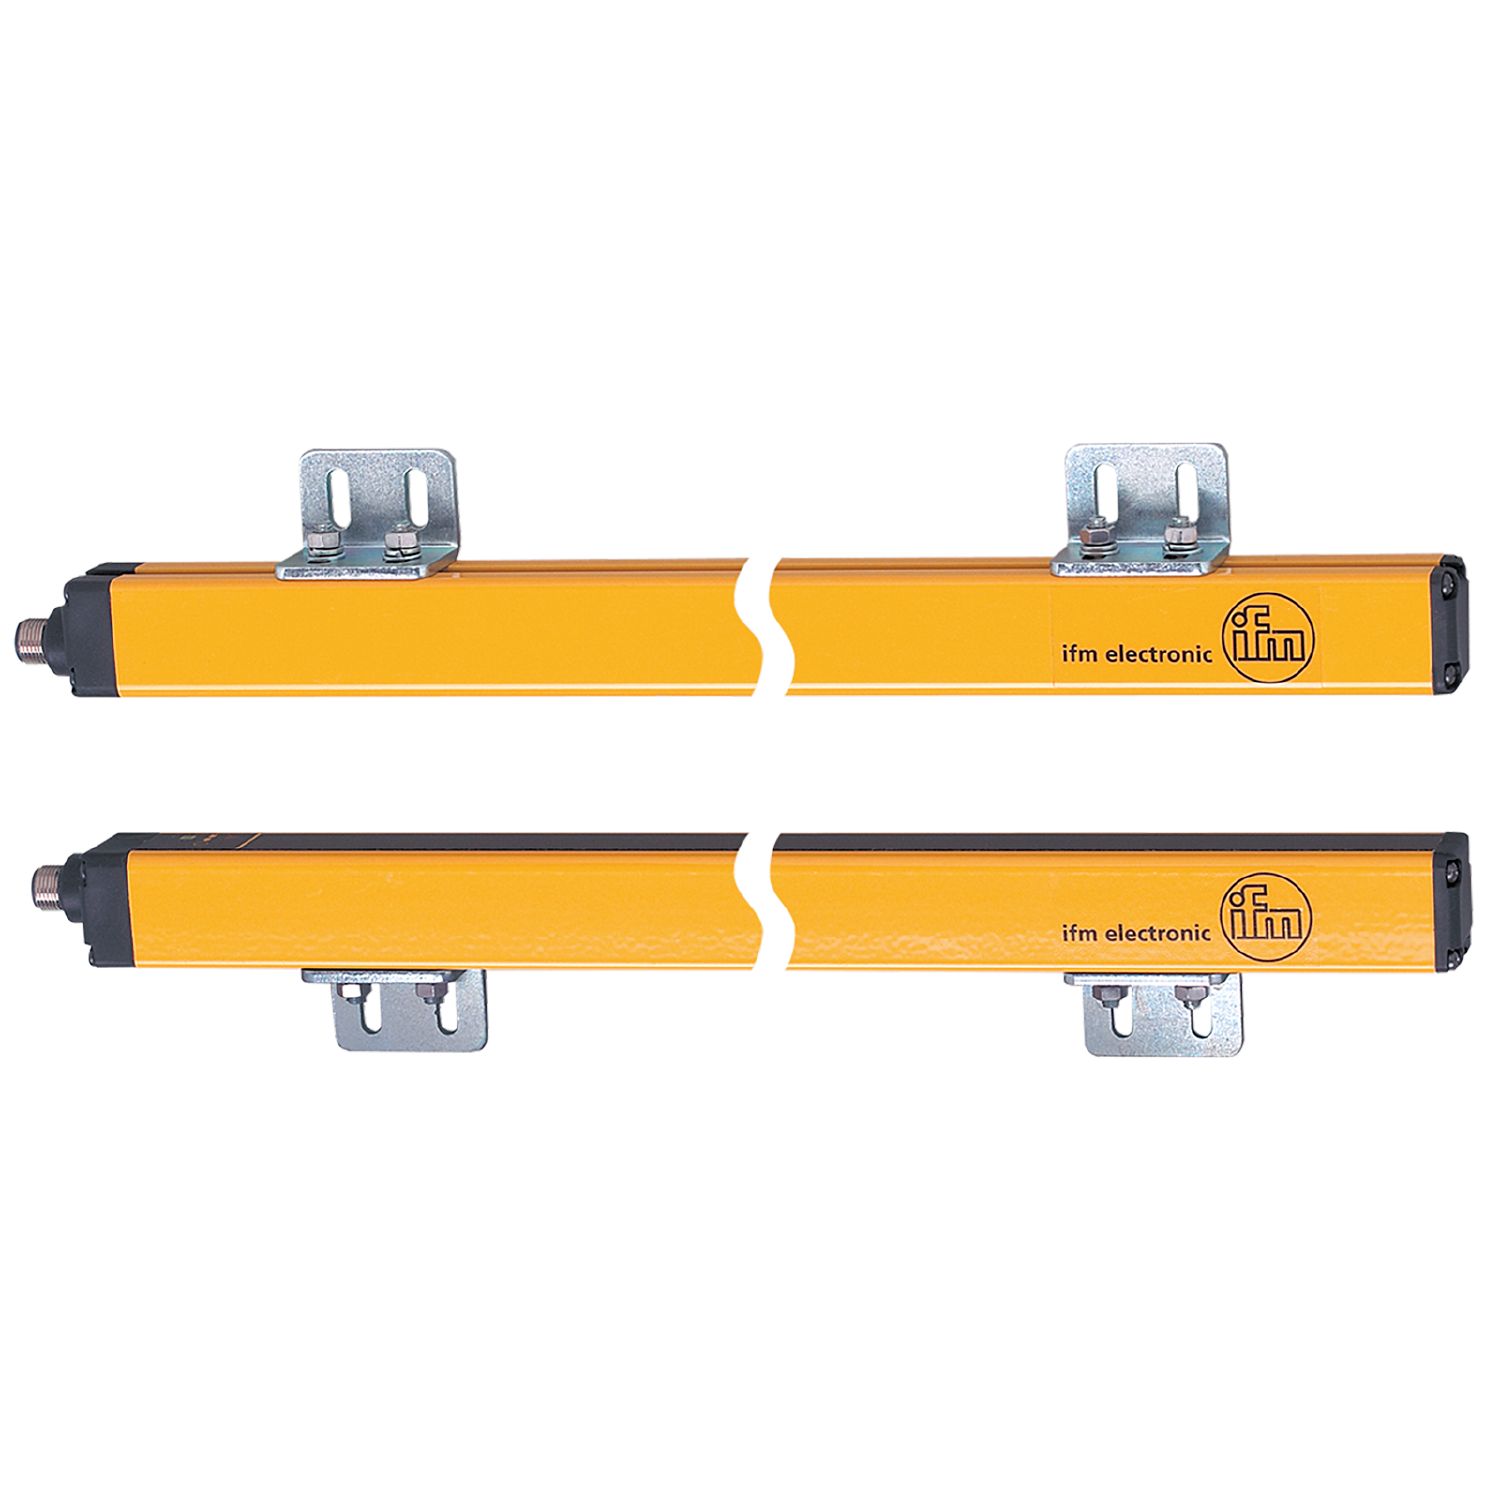 OY247S - Safety light curtain - ifm